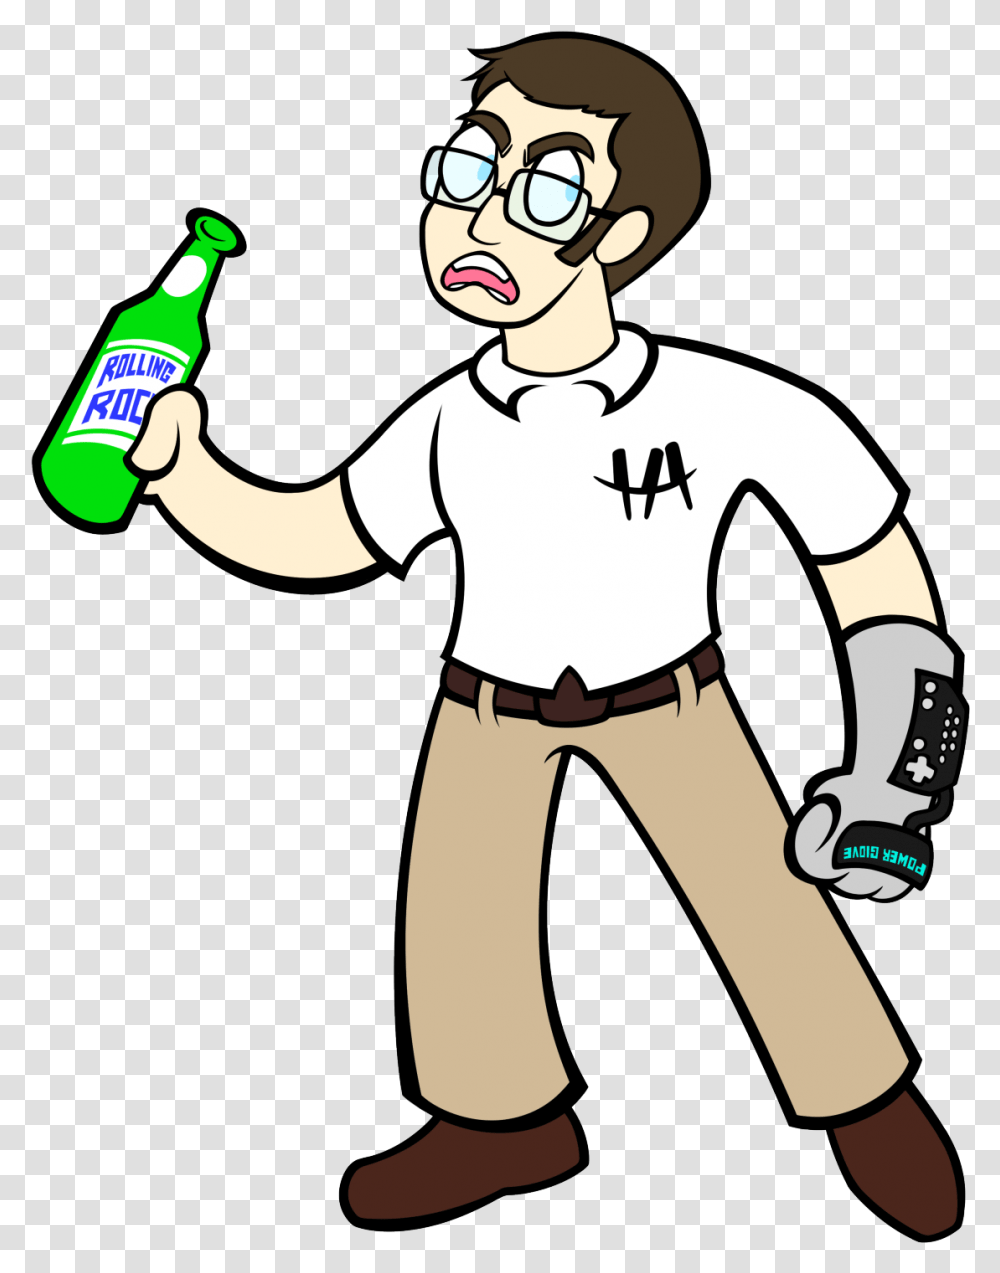 Hes The Angry Video Game Nerd, Worker, Beverage, Drink, Bottle Transparent Png